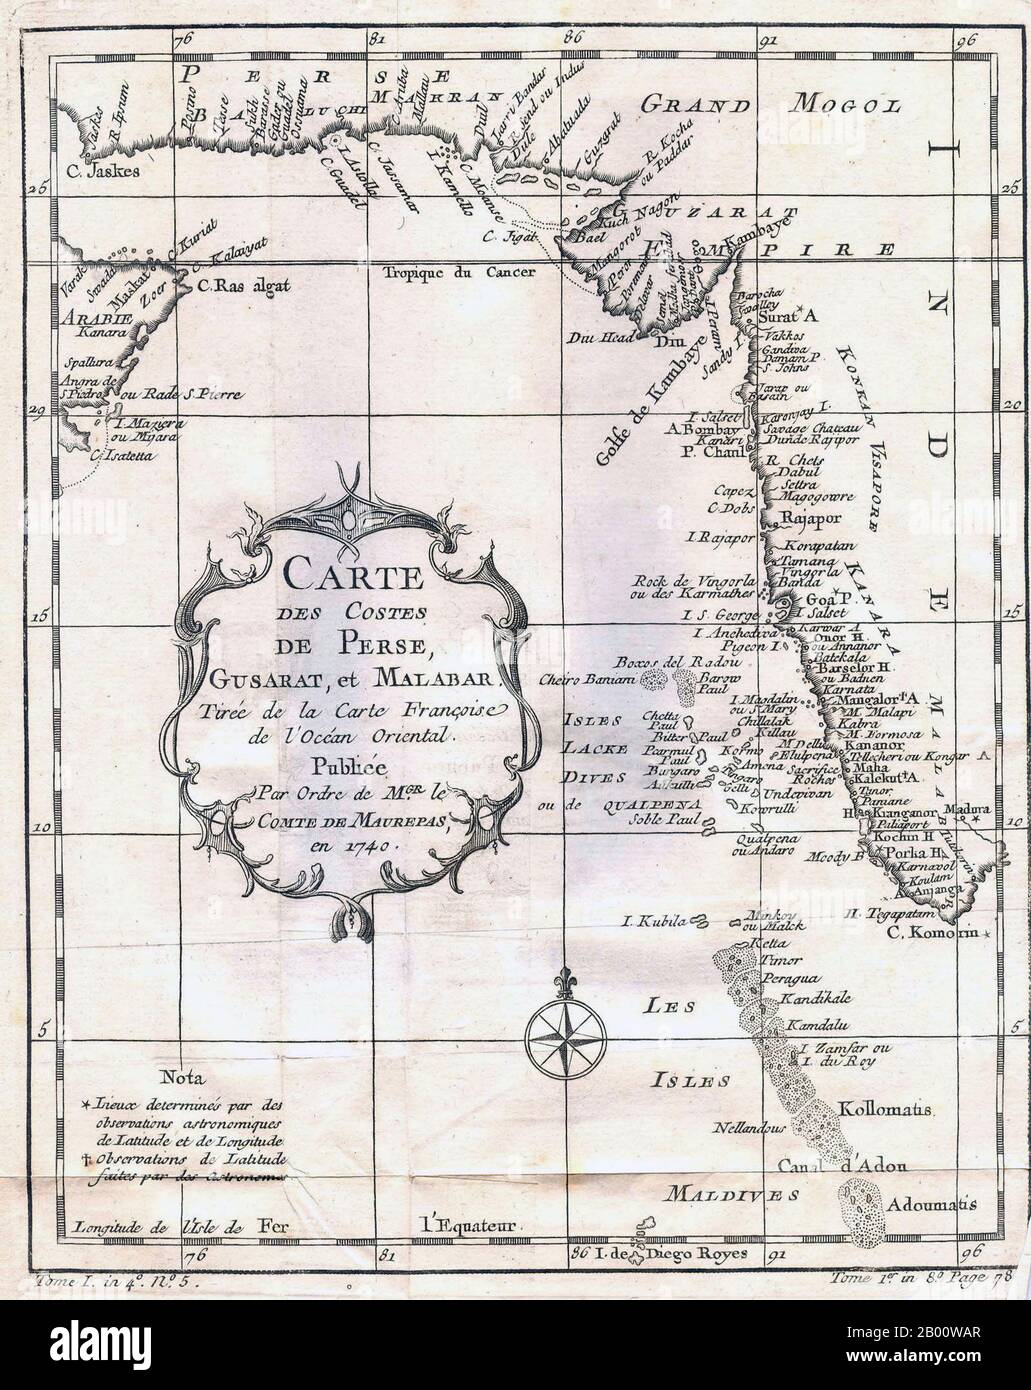 Indian Ocean: A map of the Coasts of Persia, Gujarat and Malabar, by Jacques-Nicolas Bellin (1703-1772), 1740. Stock Photo